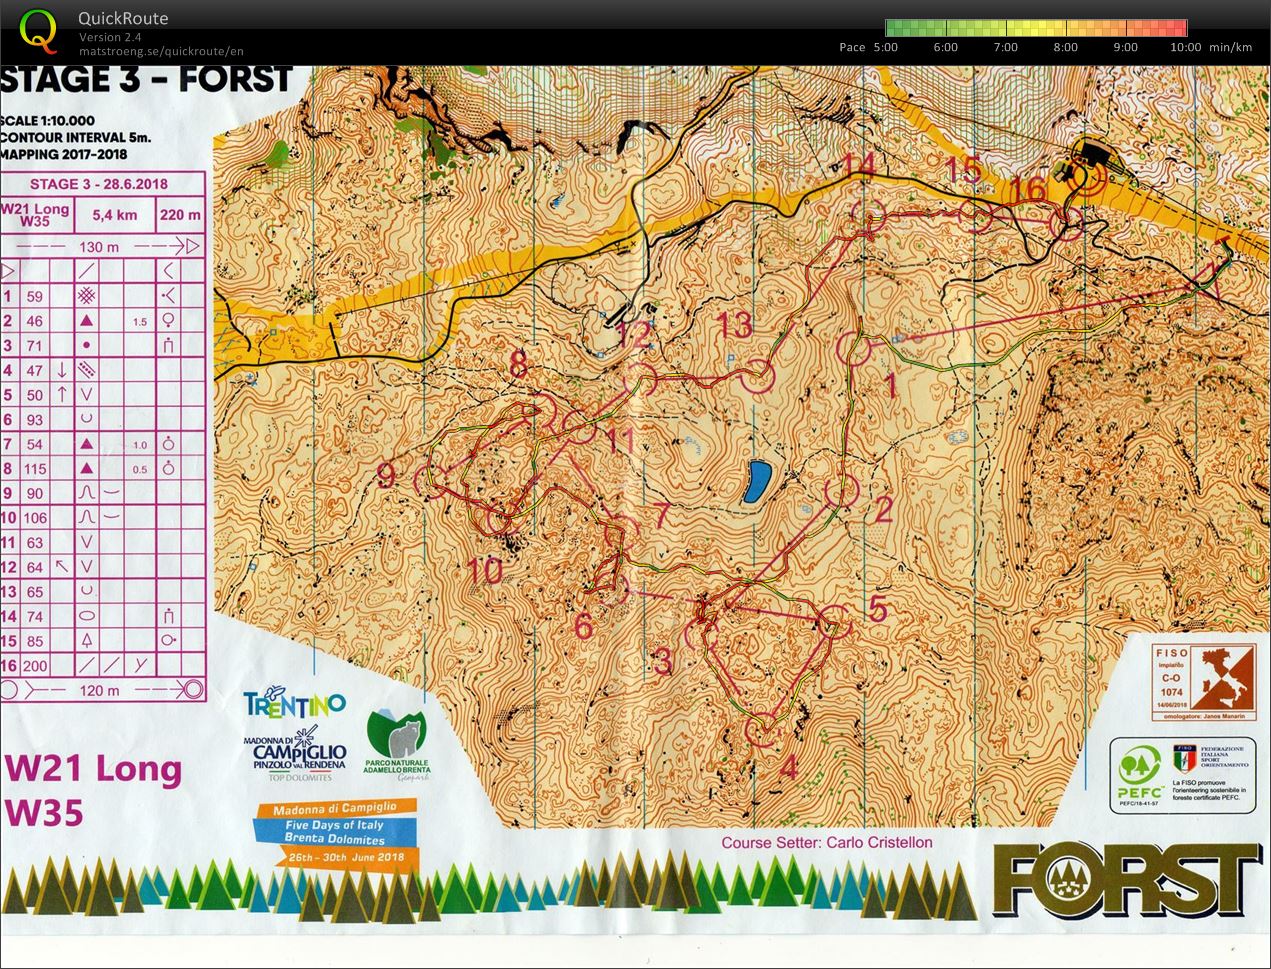 5D of Italy - stage 3 - long - D21long (2018-06-28)